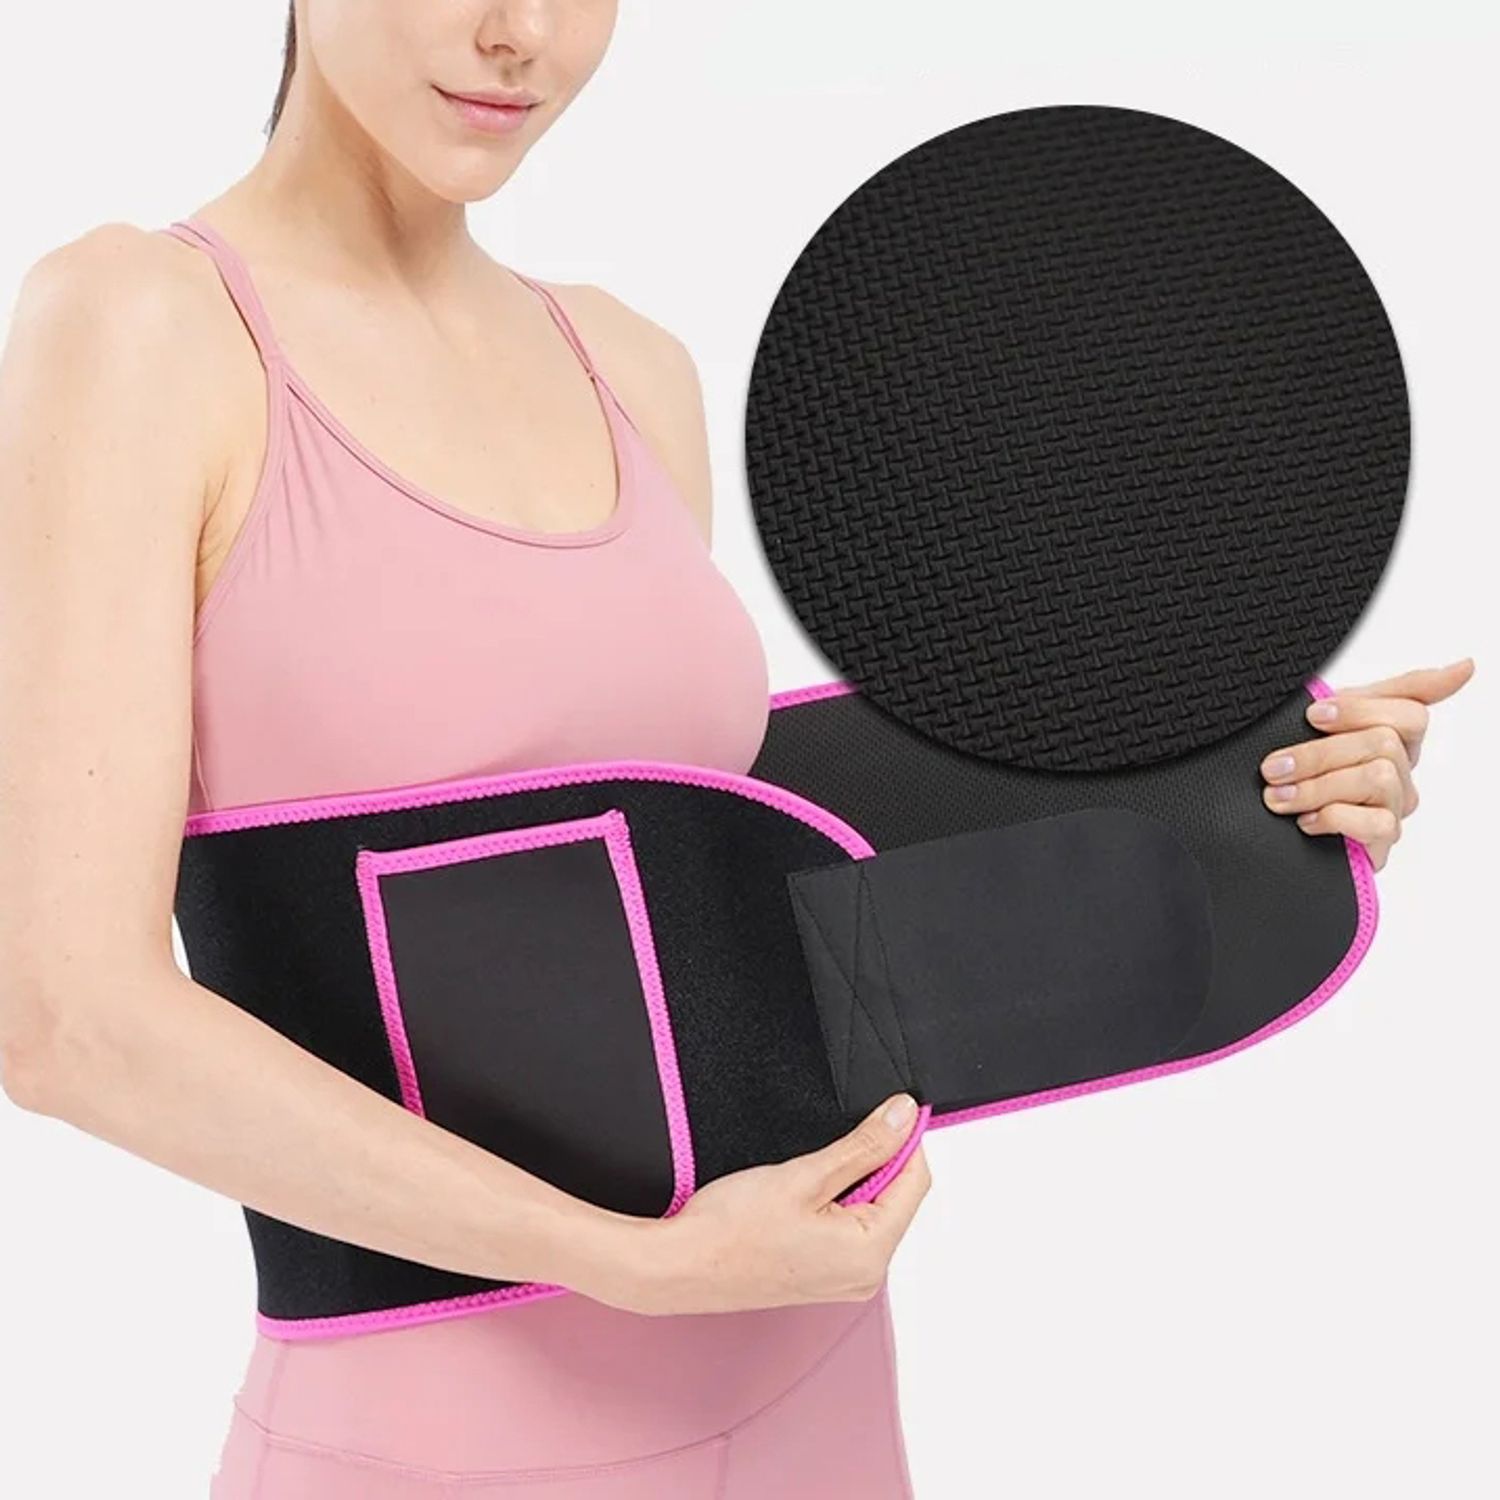 Woman wearing a pink neoprene waist trainer equipped with a convenient phone pocket during exercise